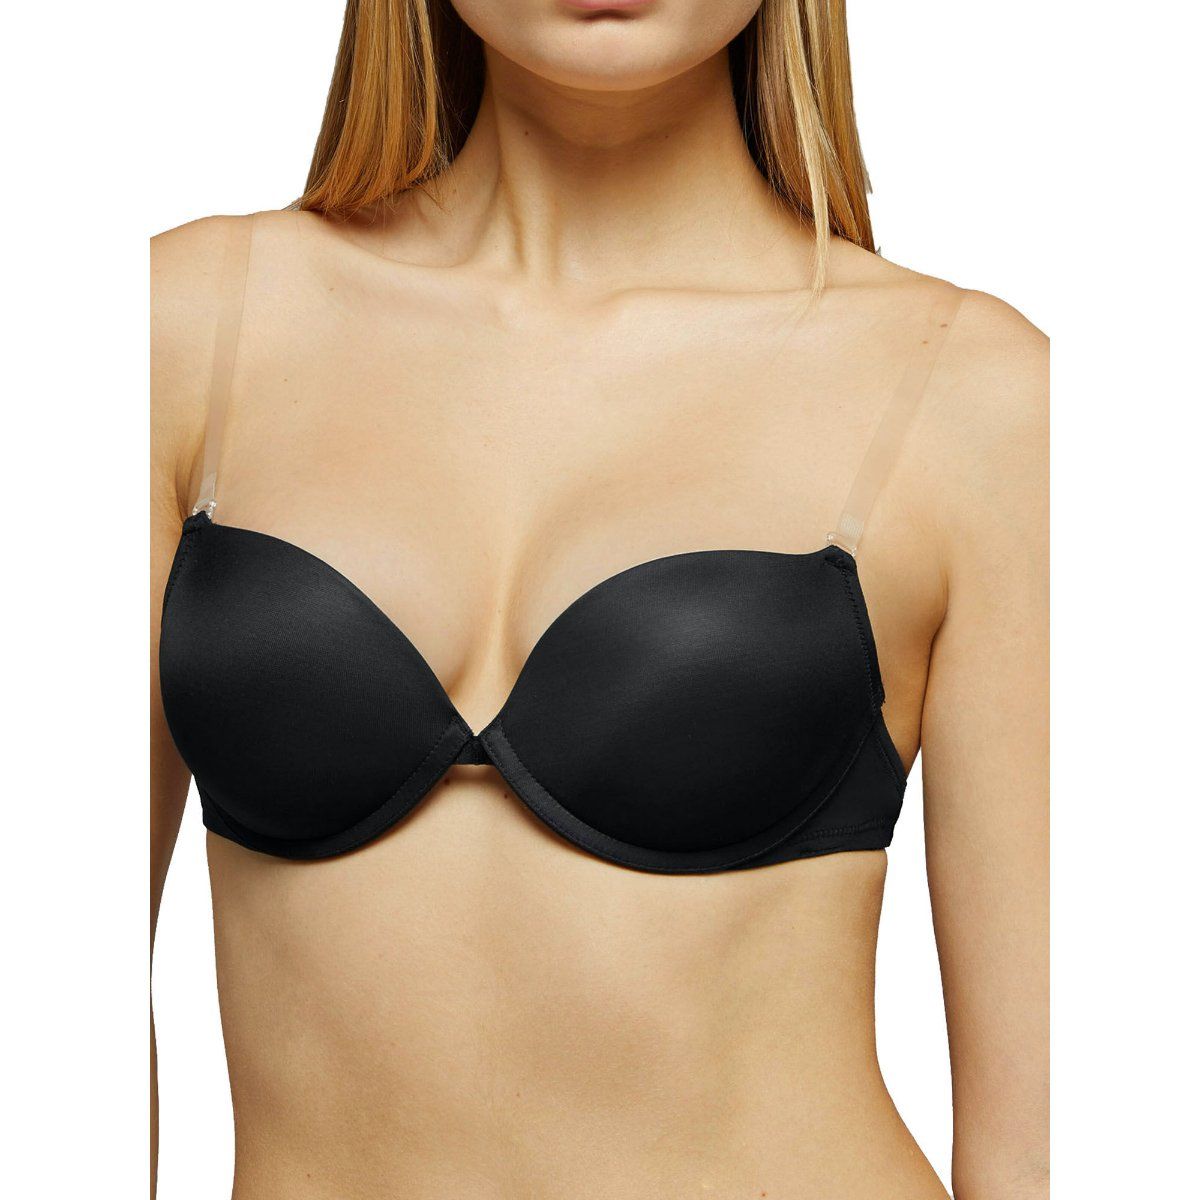 Buy Yamamay Black Under Wired Padded Push Up Bra with 2 Strips Black Online